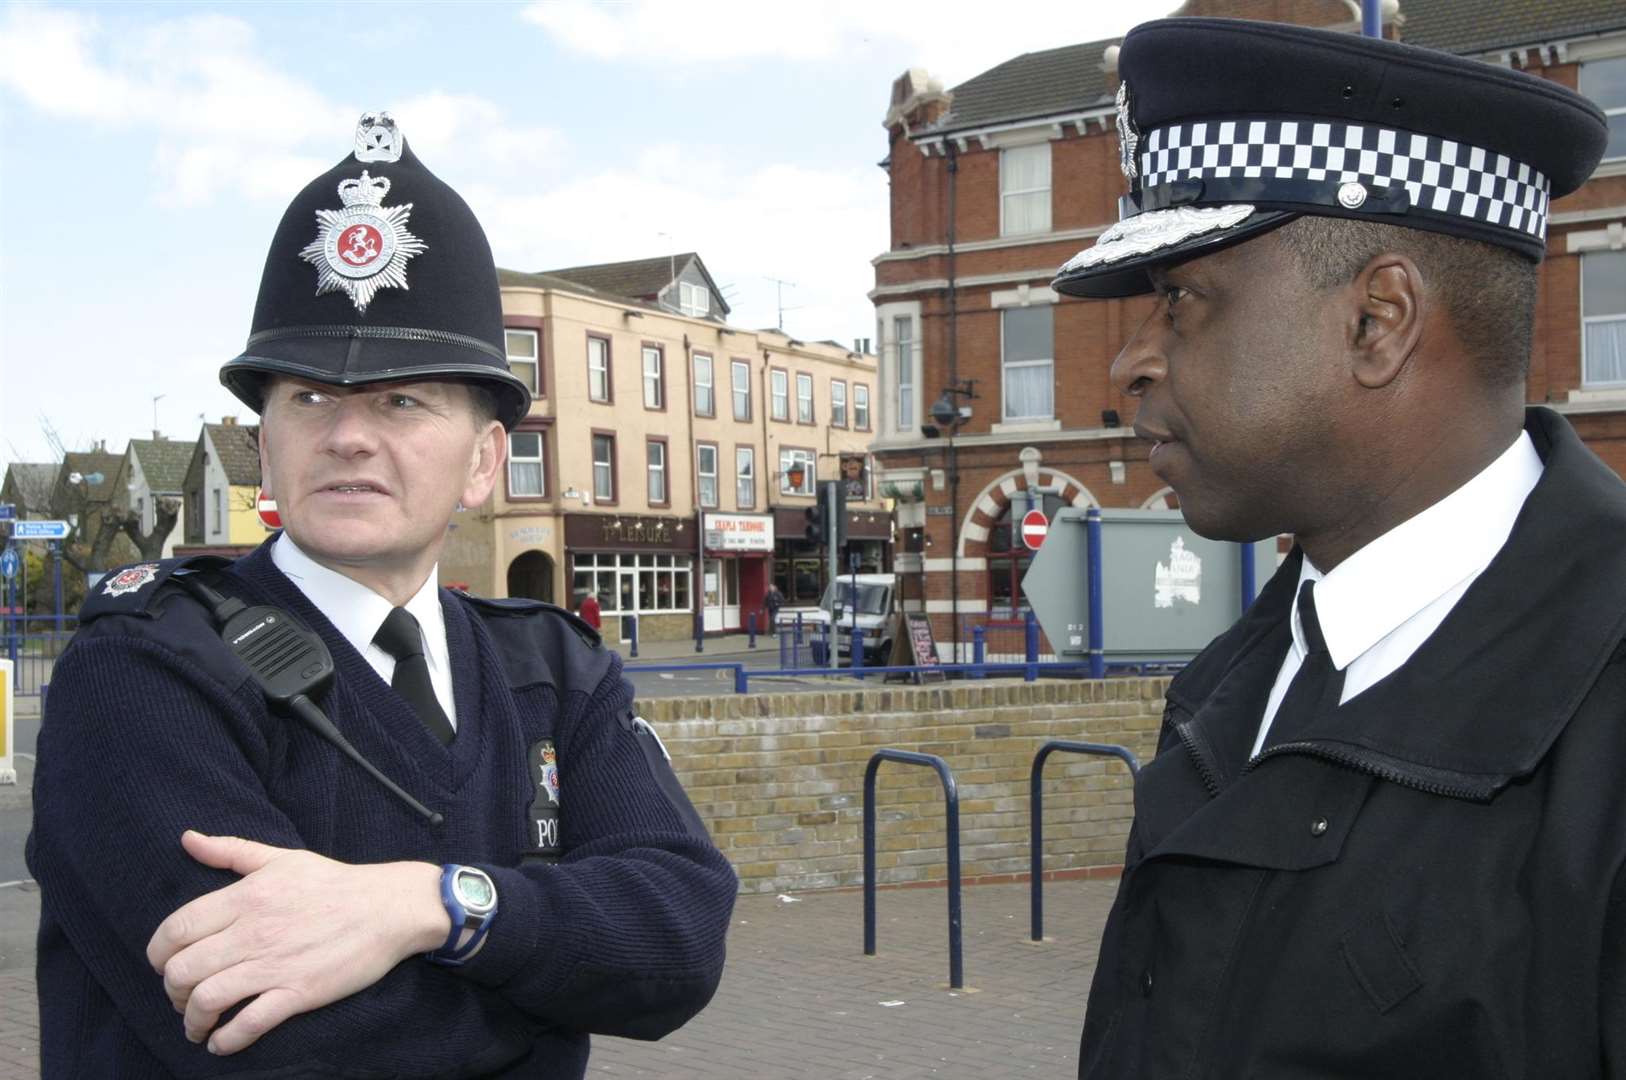 As Kent Chief Constable, Michael Fuller goes on patrol with one of his officers, PC Bob Fursley, in Sheerness